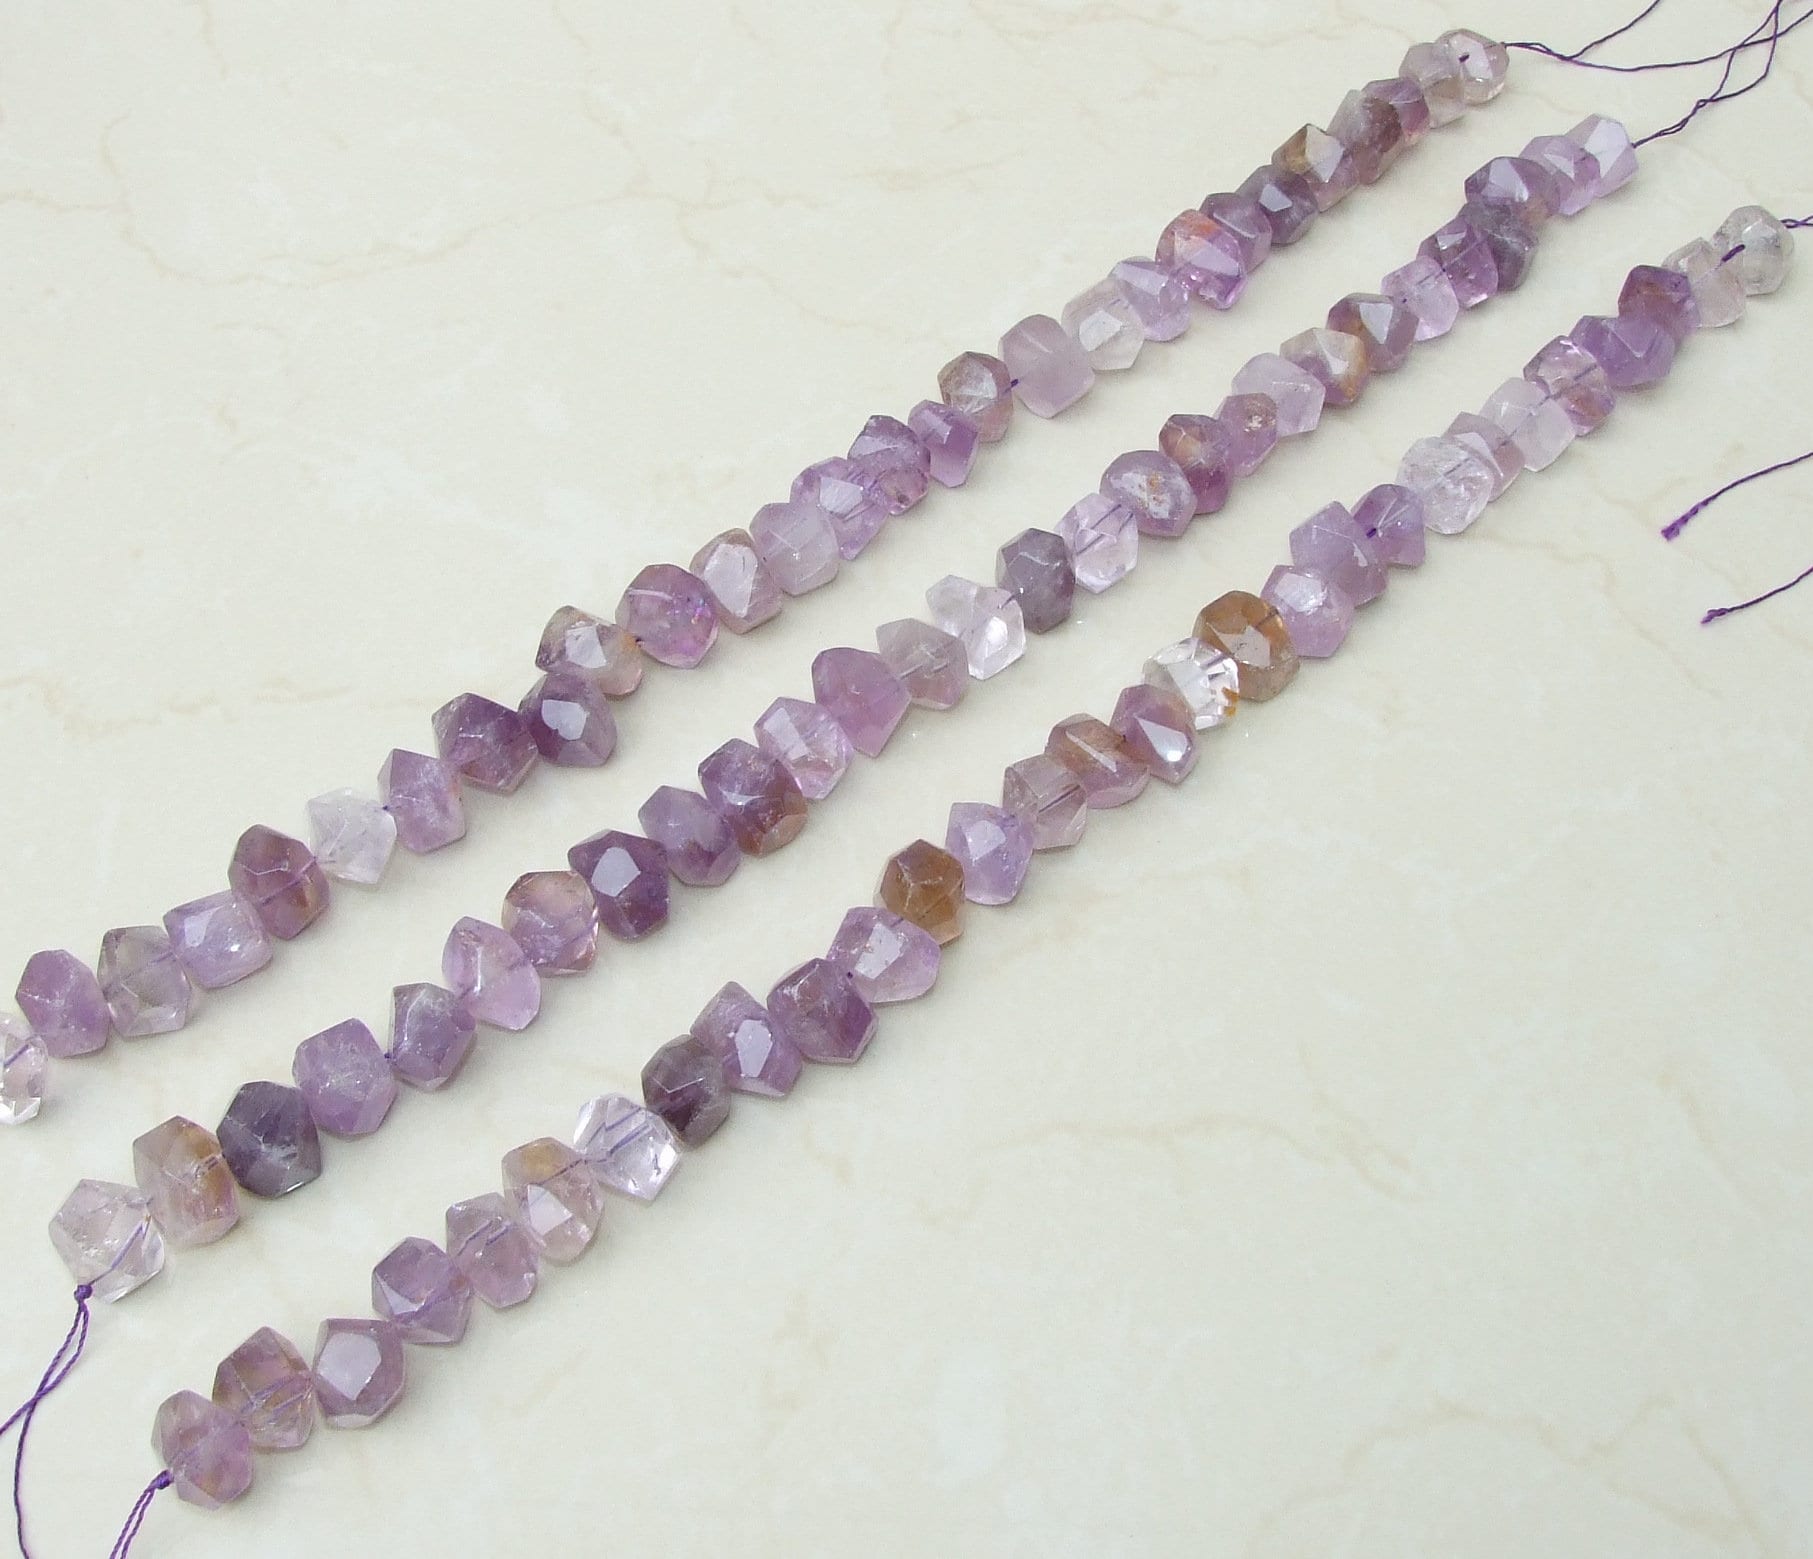 Light Amethyst Faceted Nugget, Polished Amethyst Beads, Gemstone Beads, Jewelry Stones, Amethyst Nuggets, Half Strand - 14mm x 14mm x 20mm